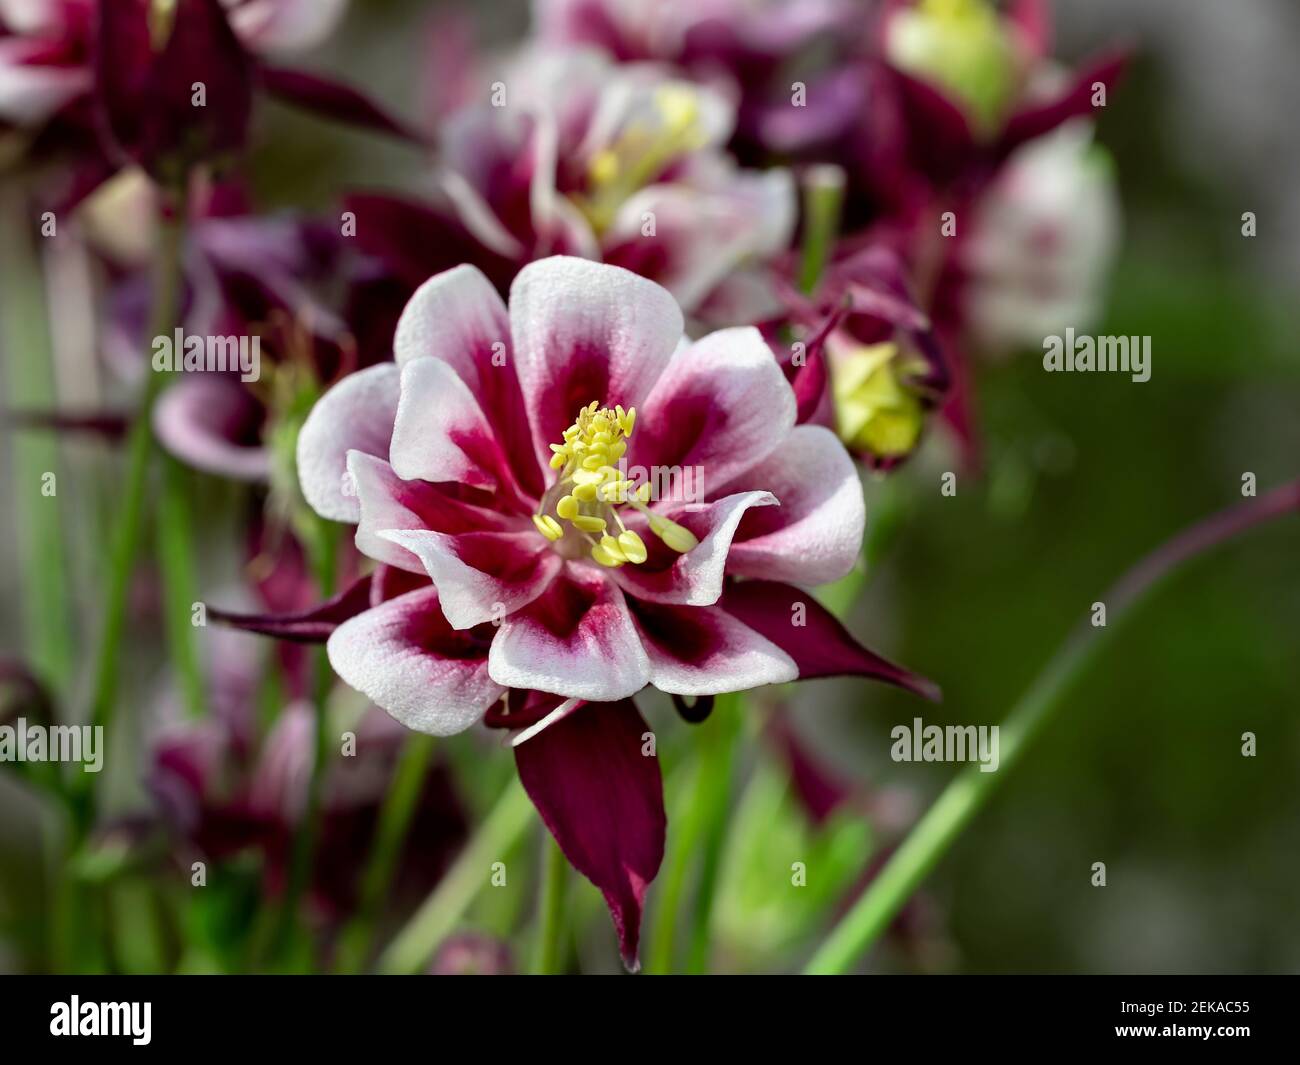 Perennial herb Aquilegia vulgaris with blue flowers on a blurred background. Stock Photo